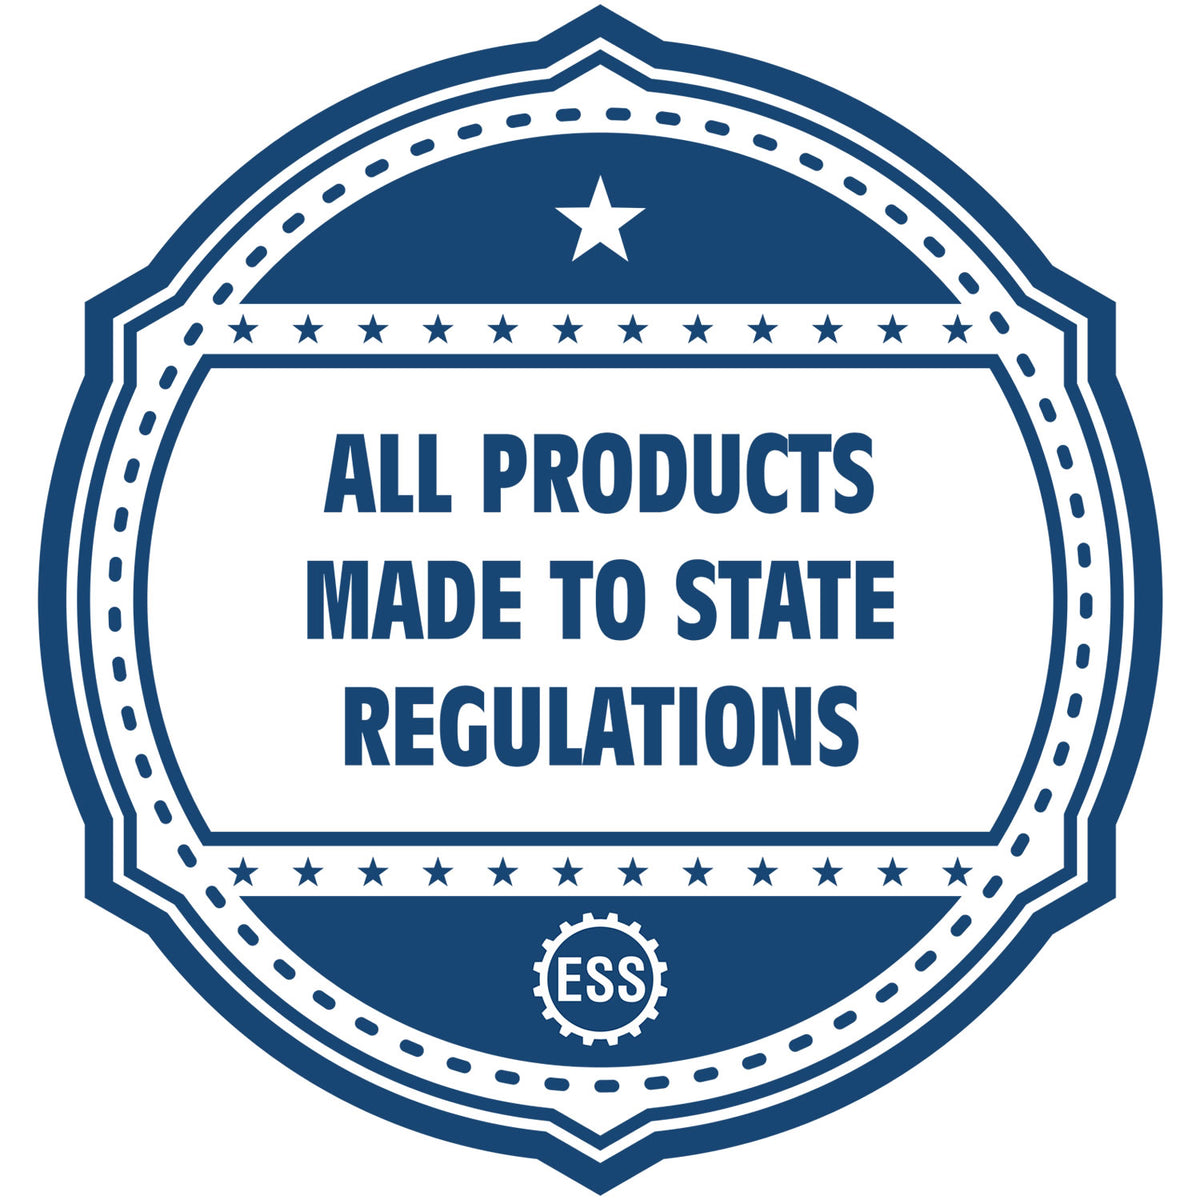 An icon or badge element for the State of Montana Soft Land Surveyor Embossing Seal showing that this product is made in compliance with state regulations.